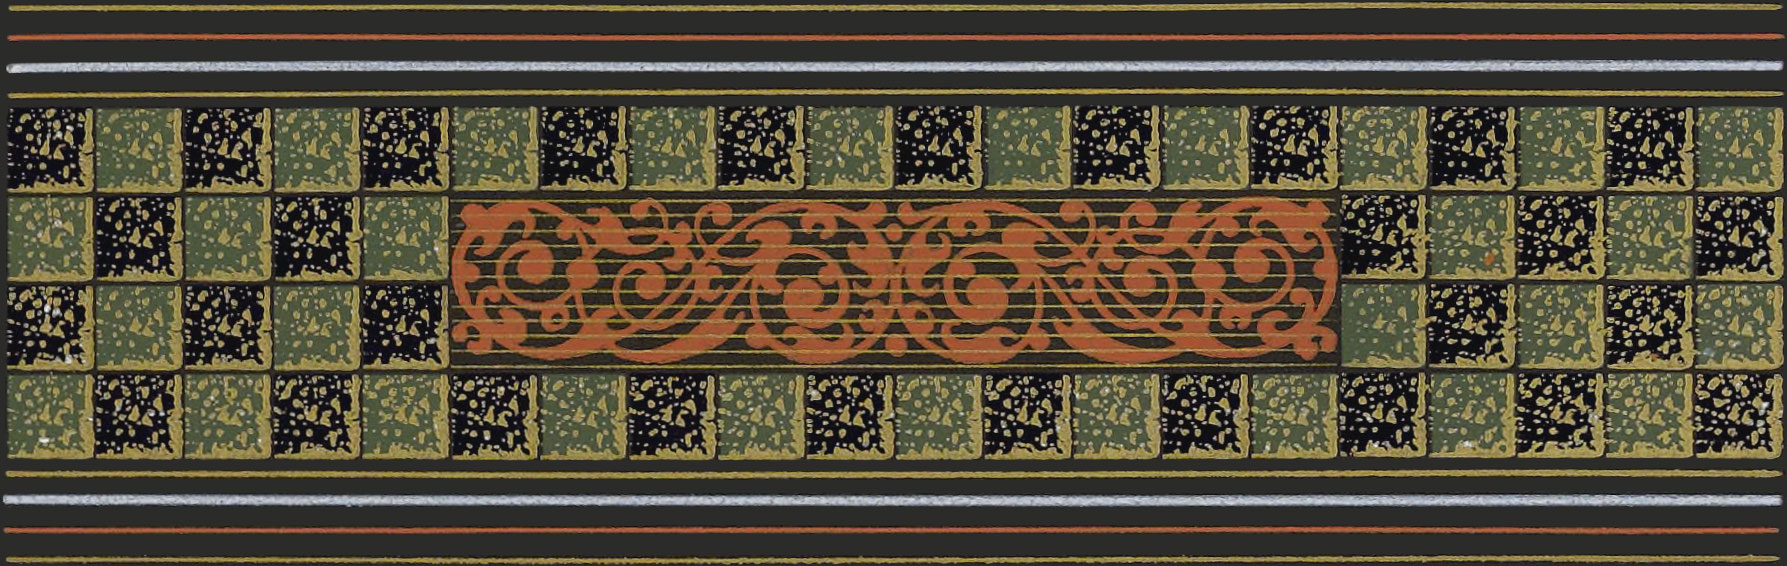 Ornate border with filigree in the middle comprising dark blue, green, red, white, and gold colors